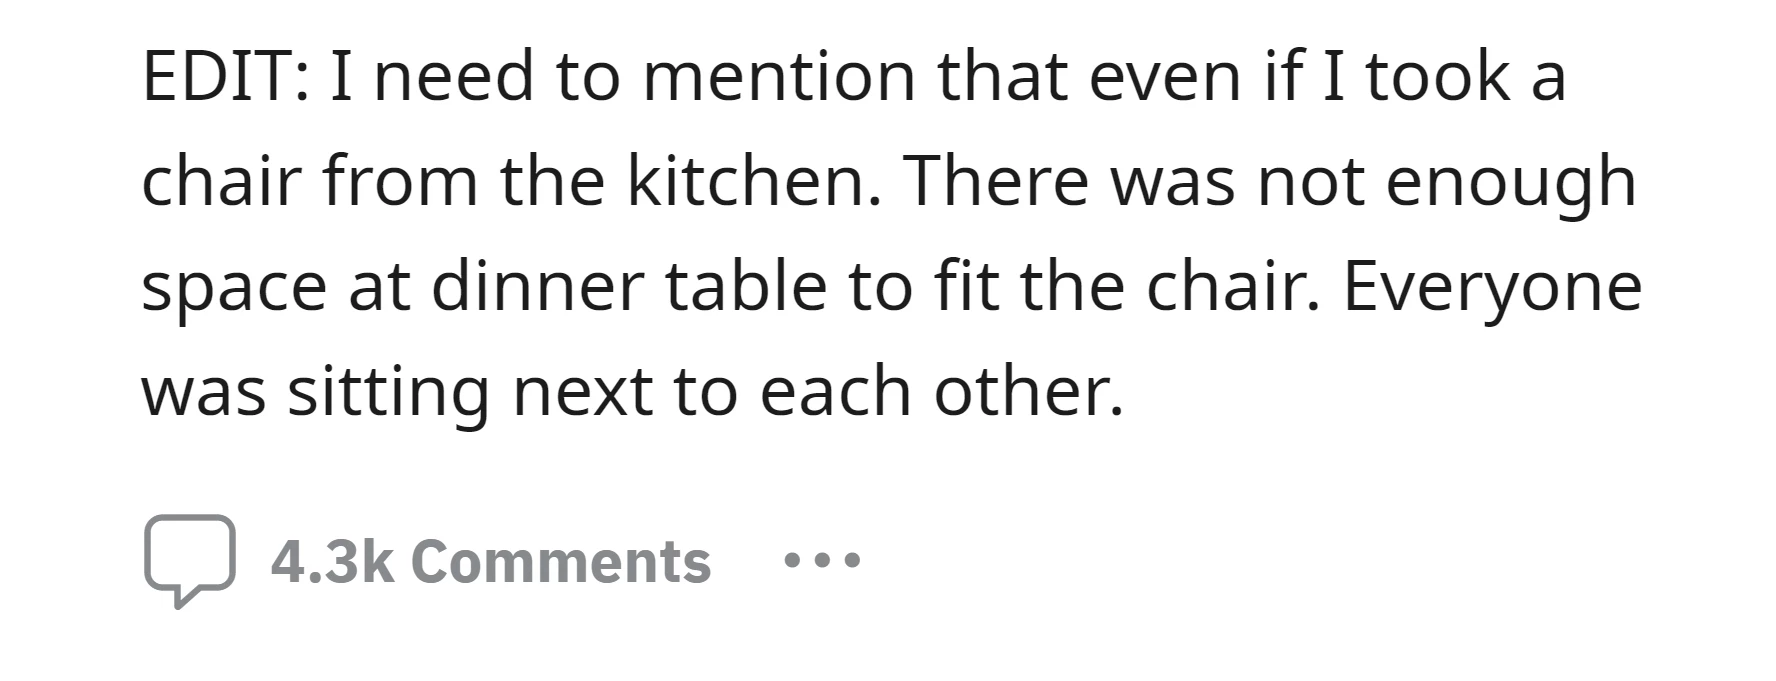 OP explained that taking a chair from the kitchen wouldn't have worked